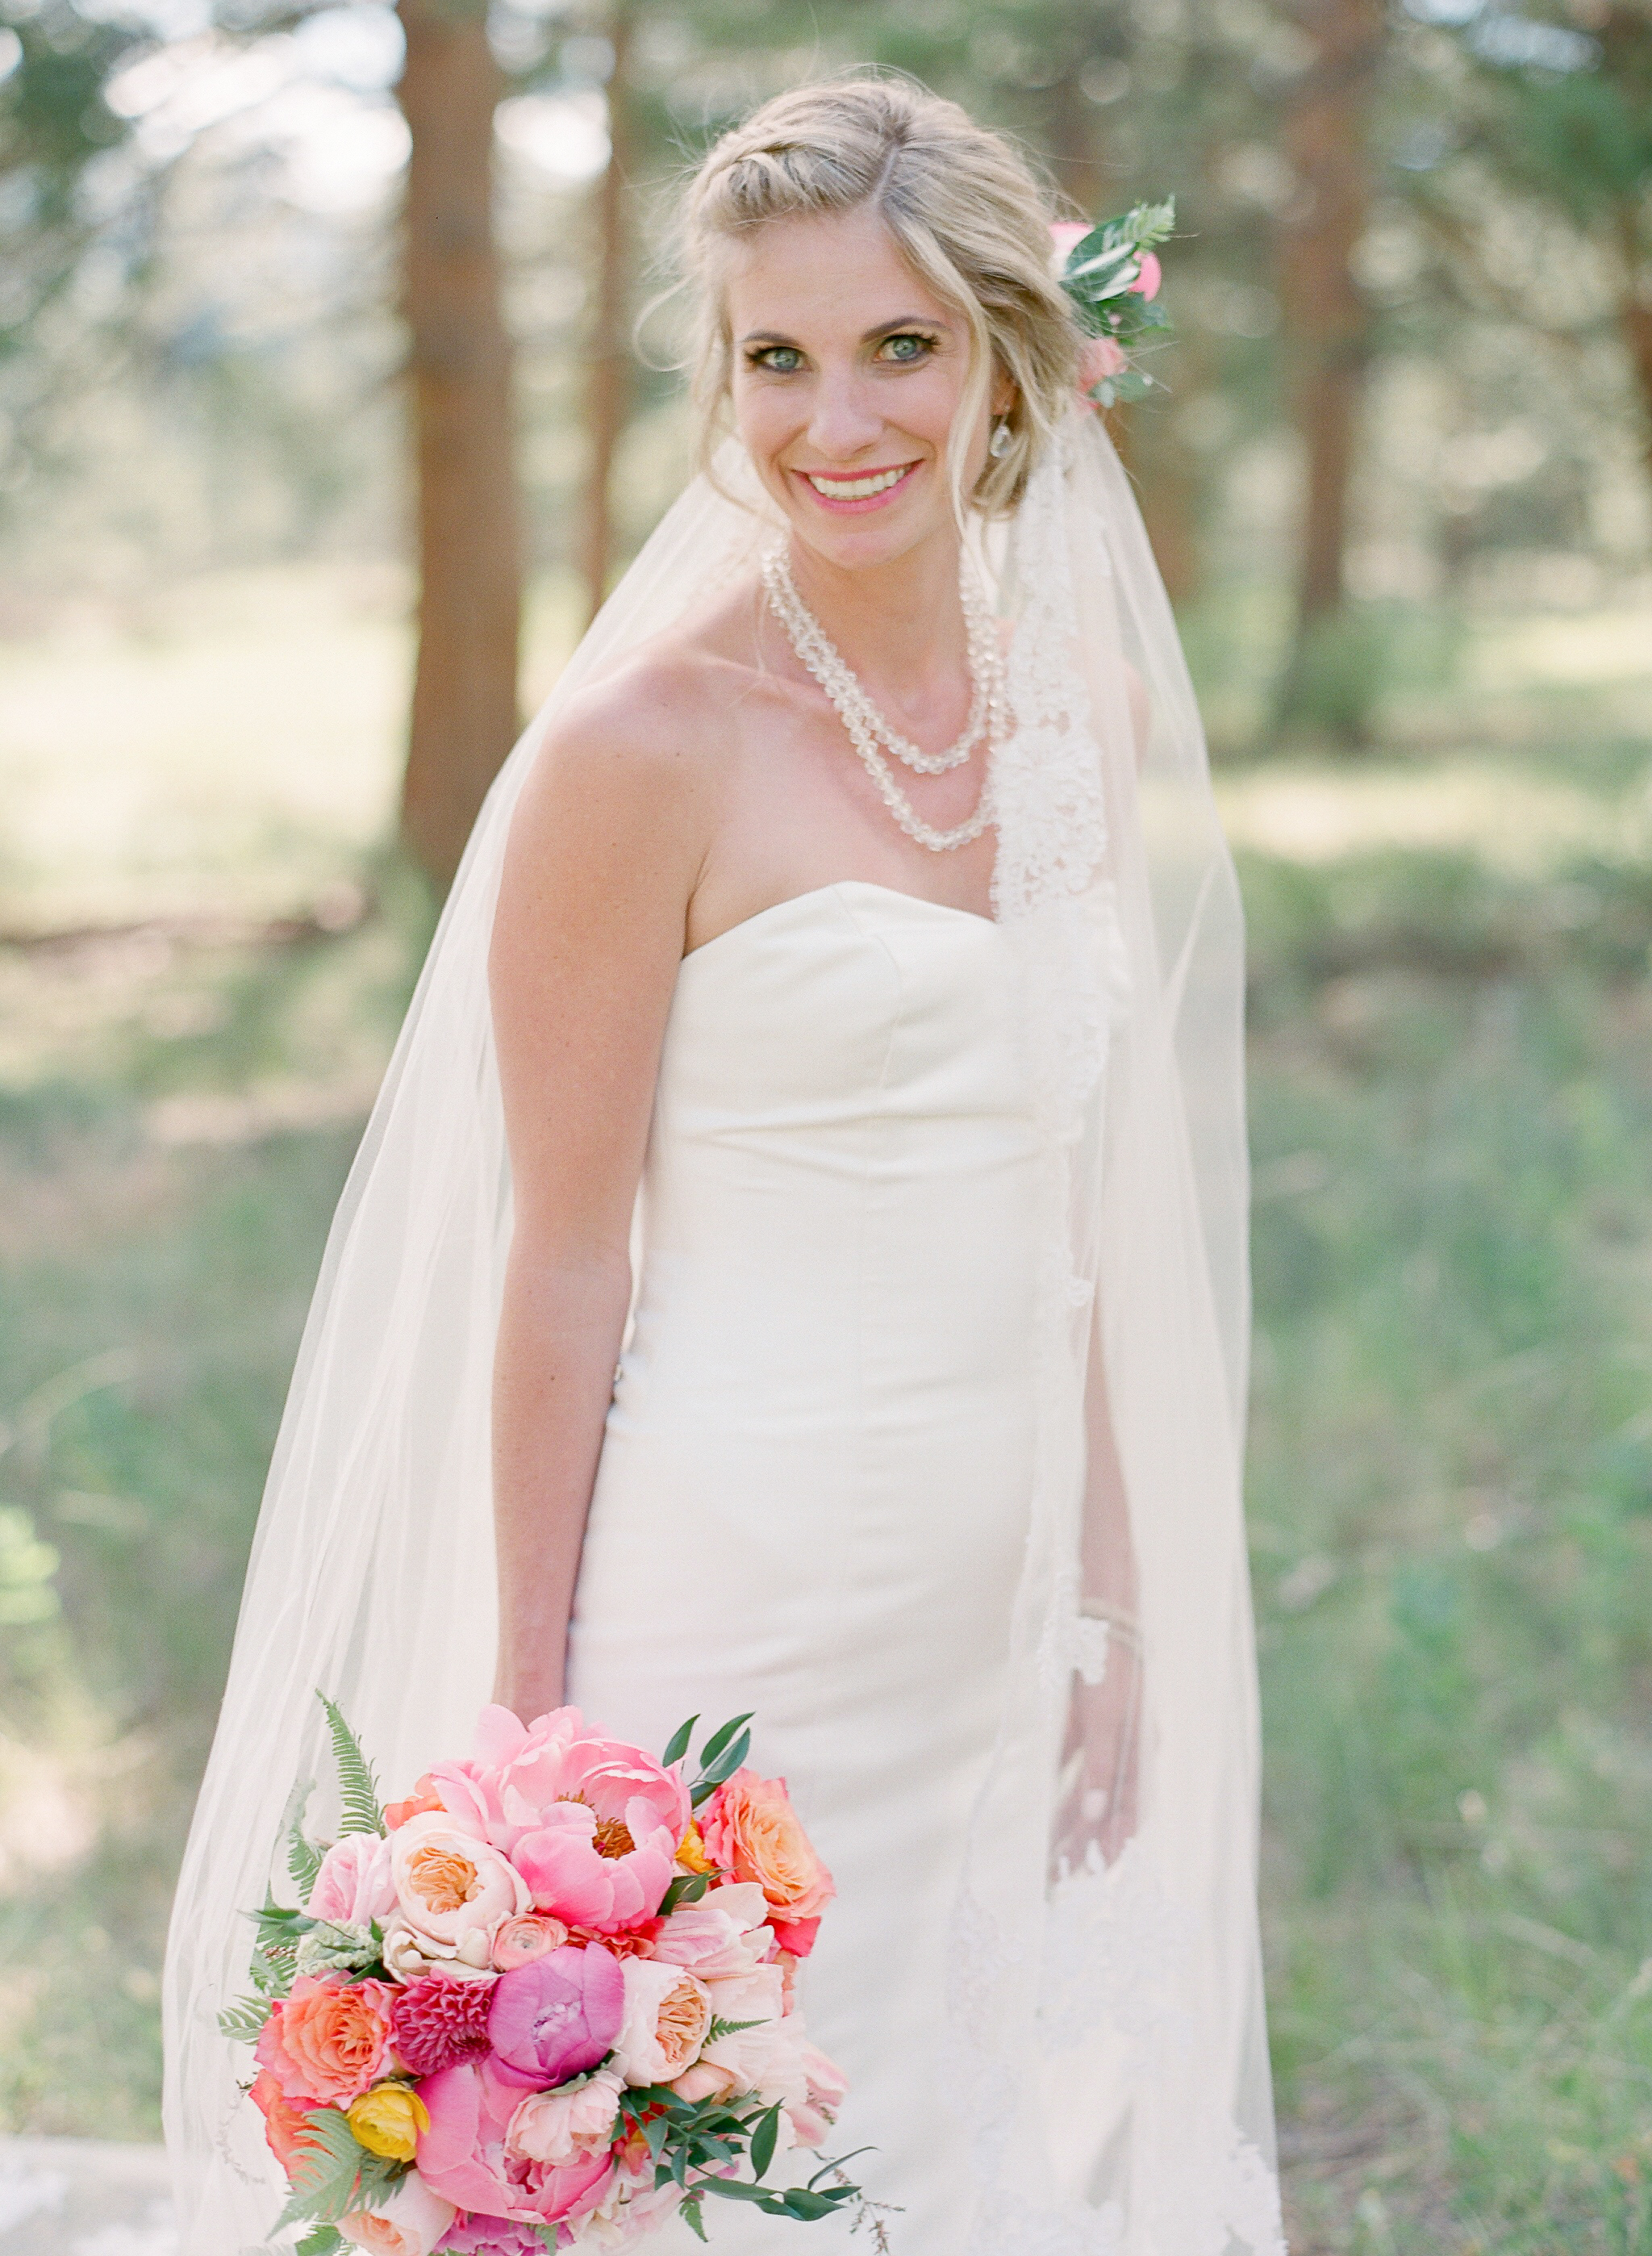  Kellie + Rob | Della Terra Mountain Chateau | wedding gown "Sarah" by Robert Bullock Bride and belt "Francine" by "Sassi Holford" | Laura Murray Photography 